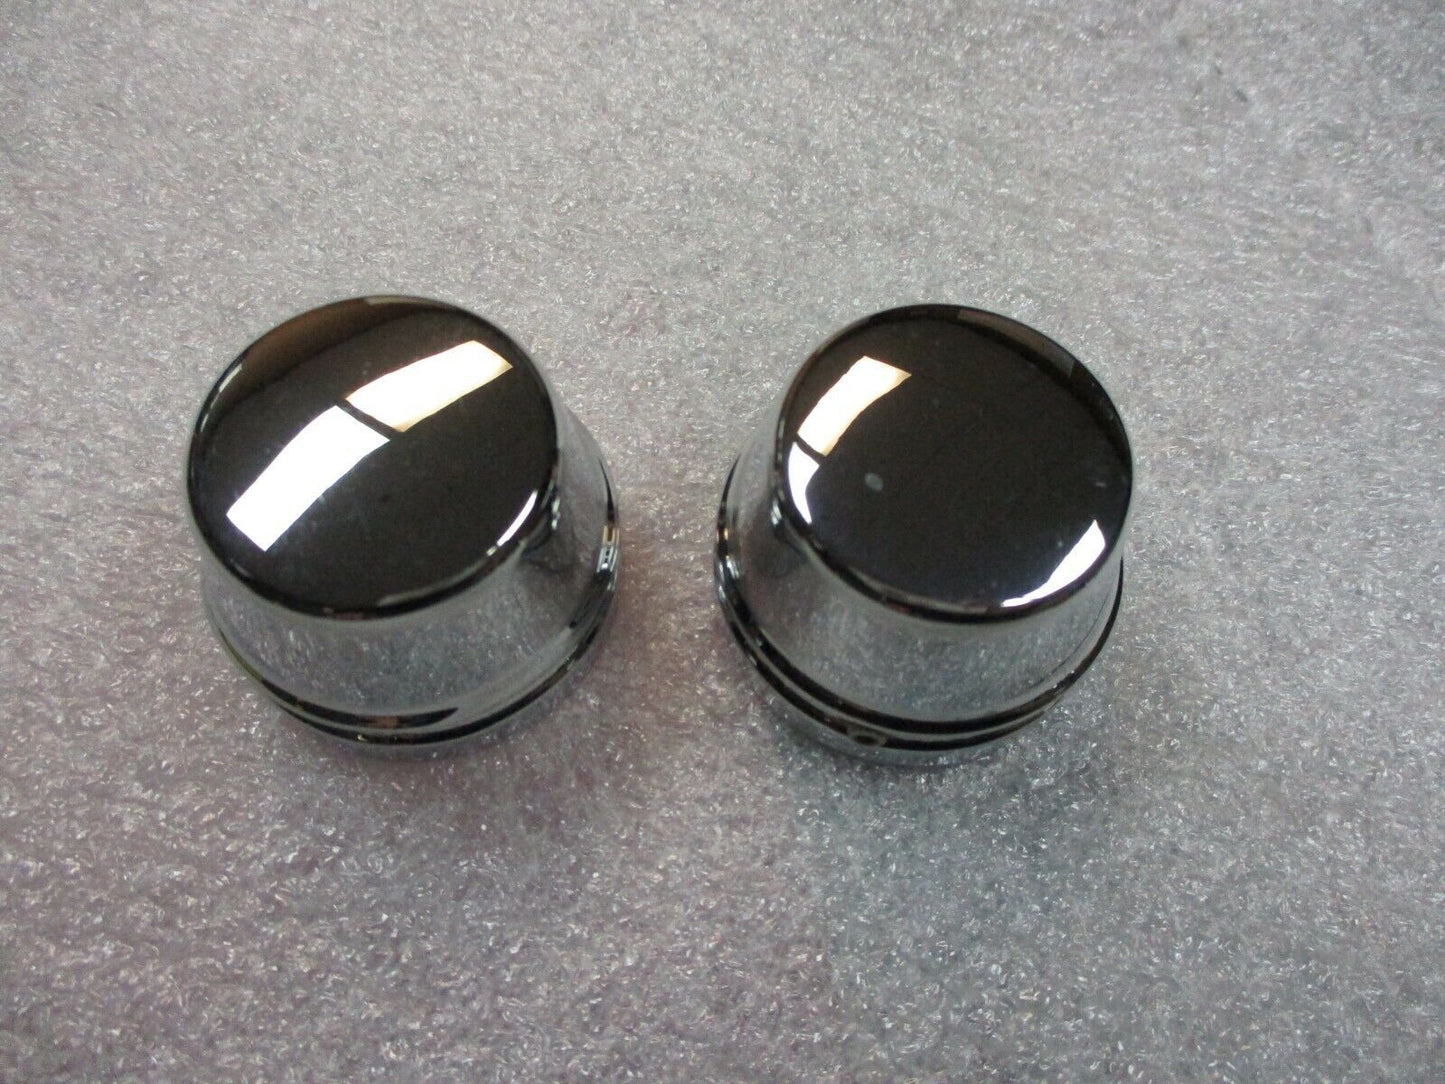 Harley Davidson OEM  Chrome Grooved  Axle Covers